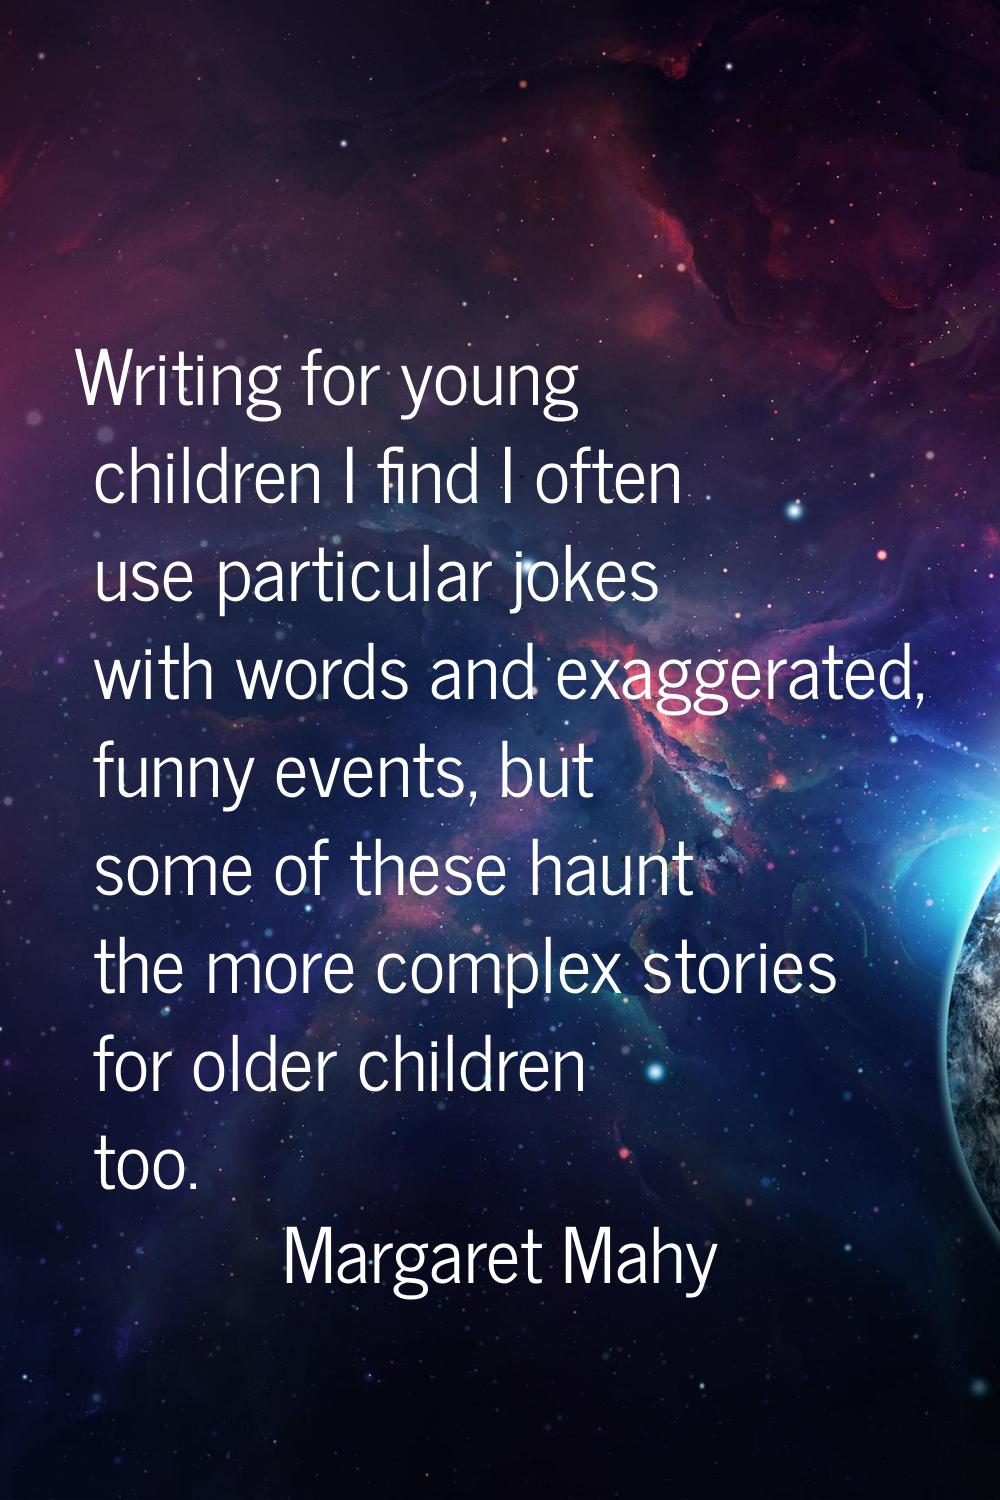 Writing for young children I find I often use particular jokes with words and exaggerated, funny ev